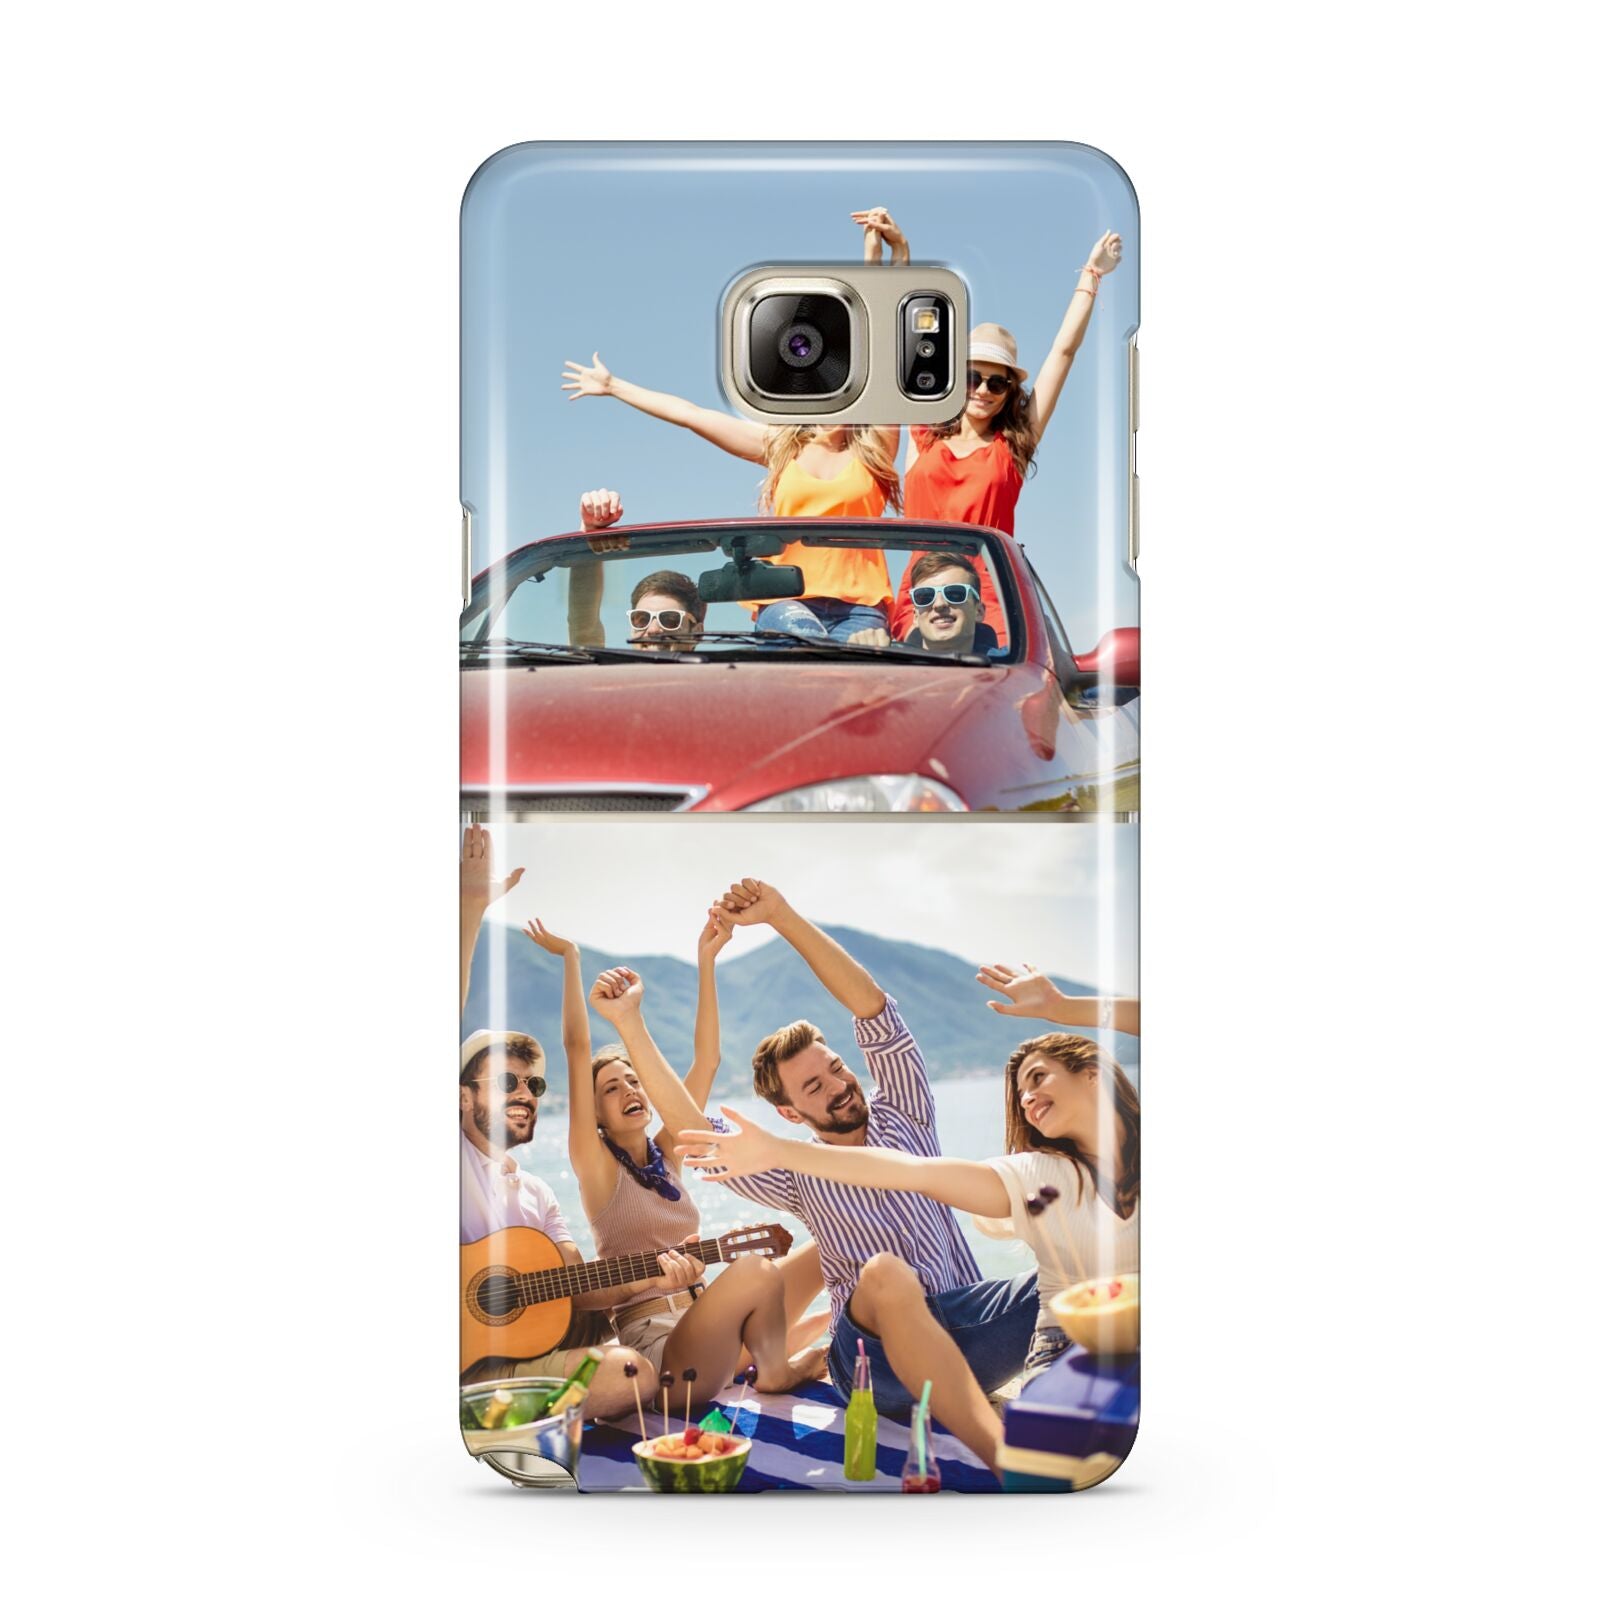 Two Photo Samsung Galaxy Note 5 Case